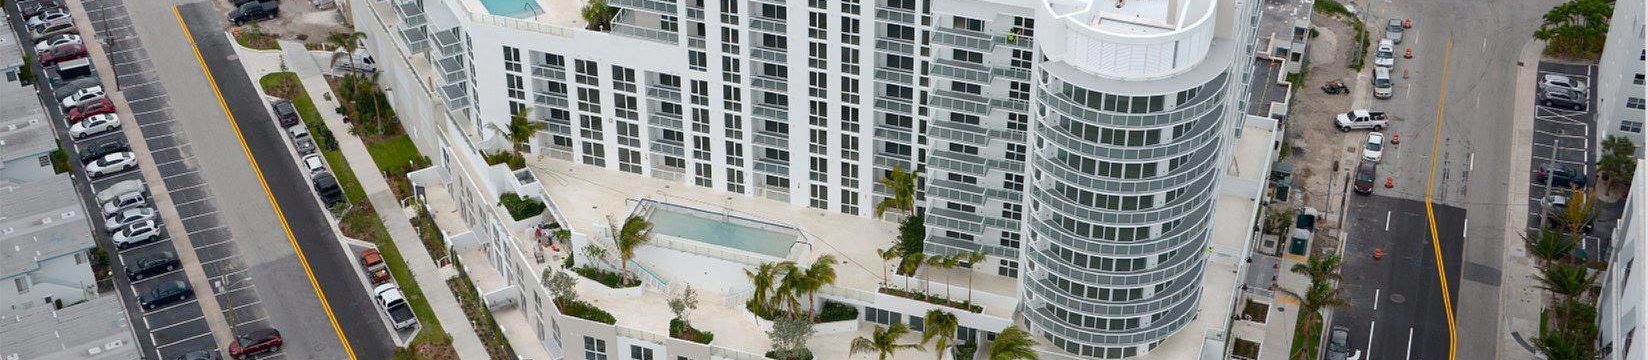 The Gale Residences in Fort Lauderdale, Fl